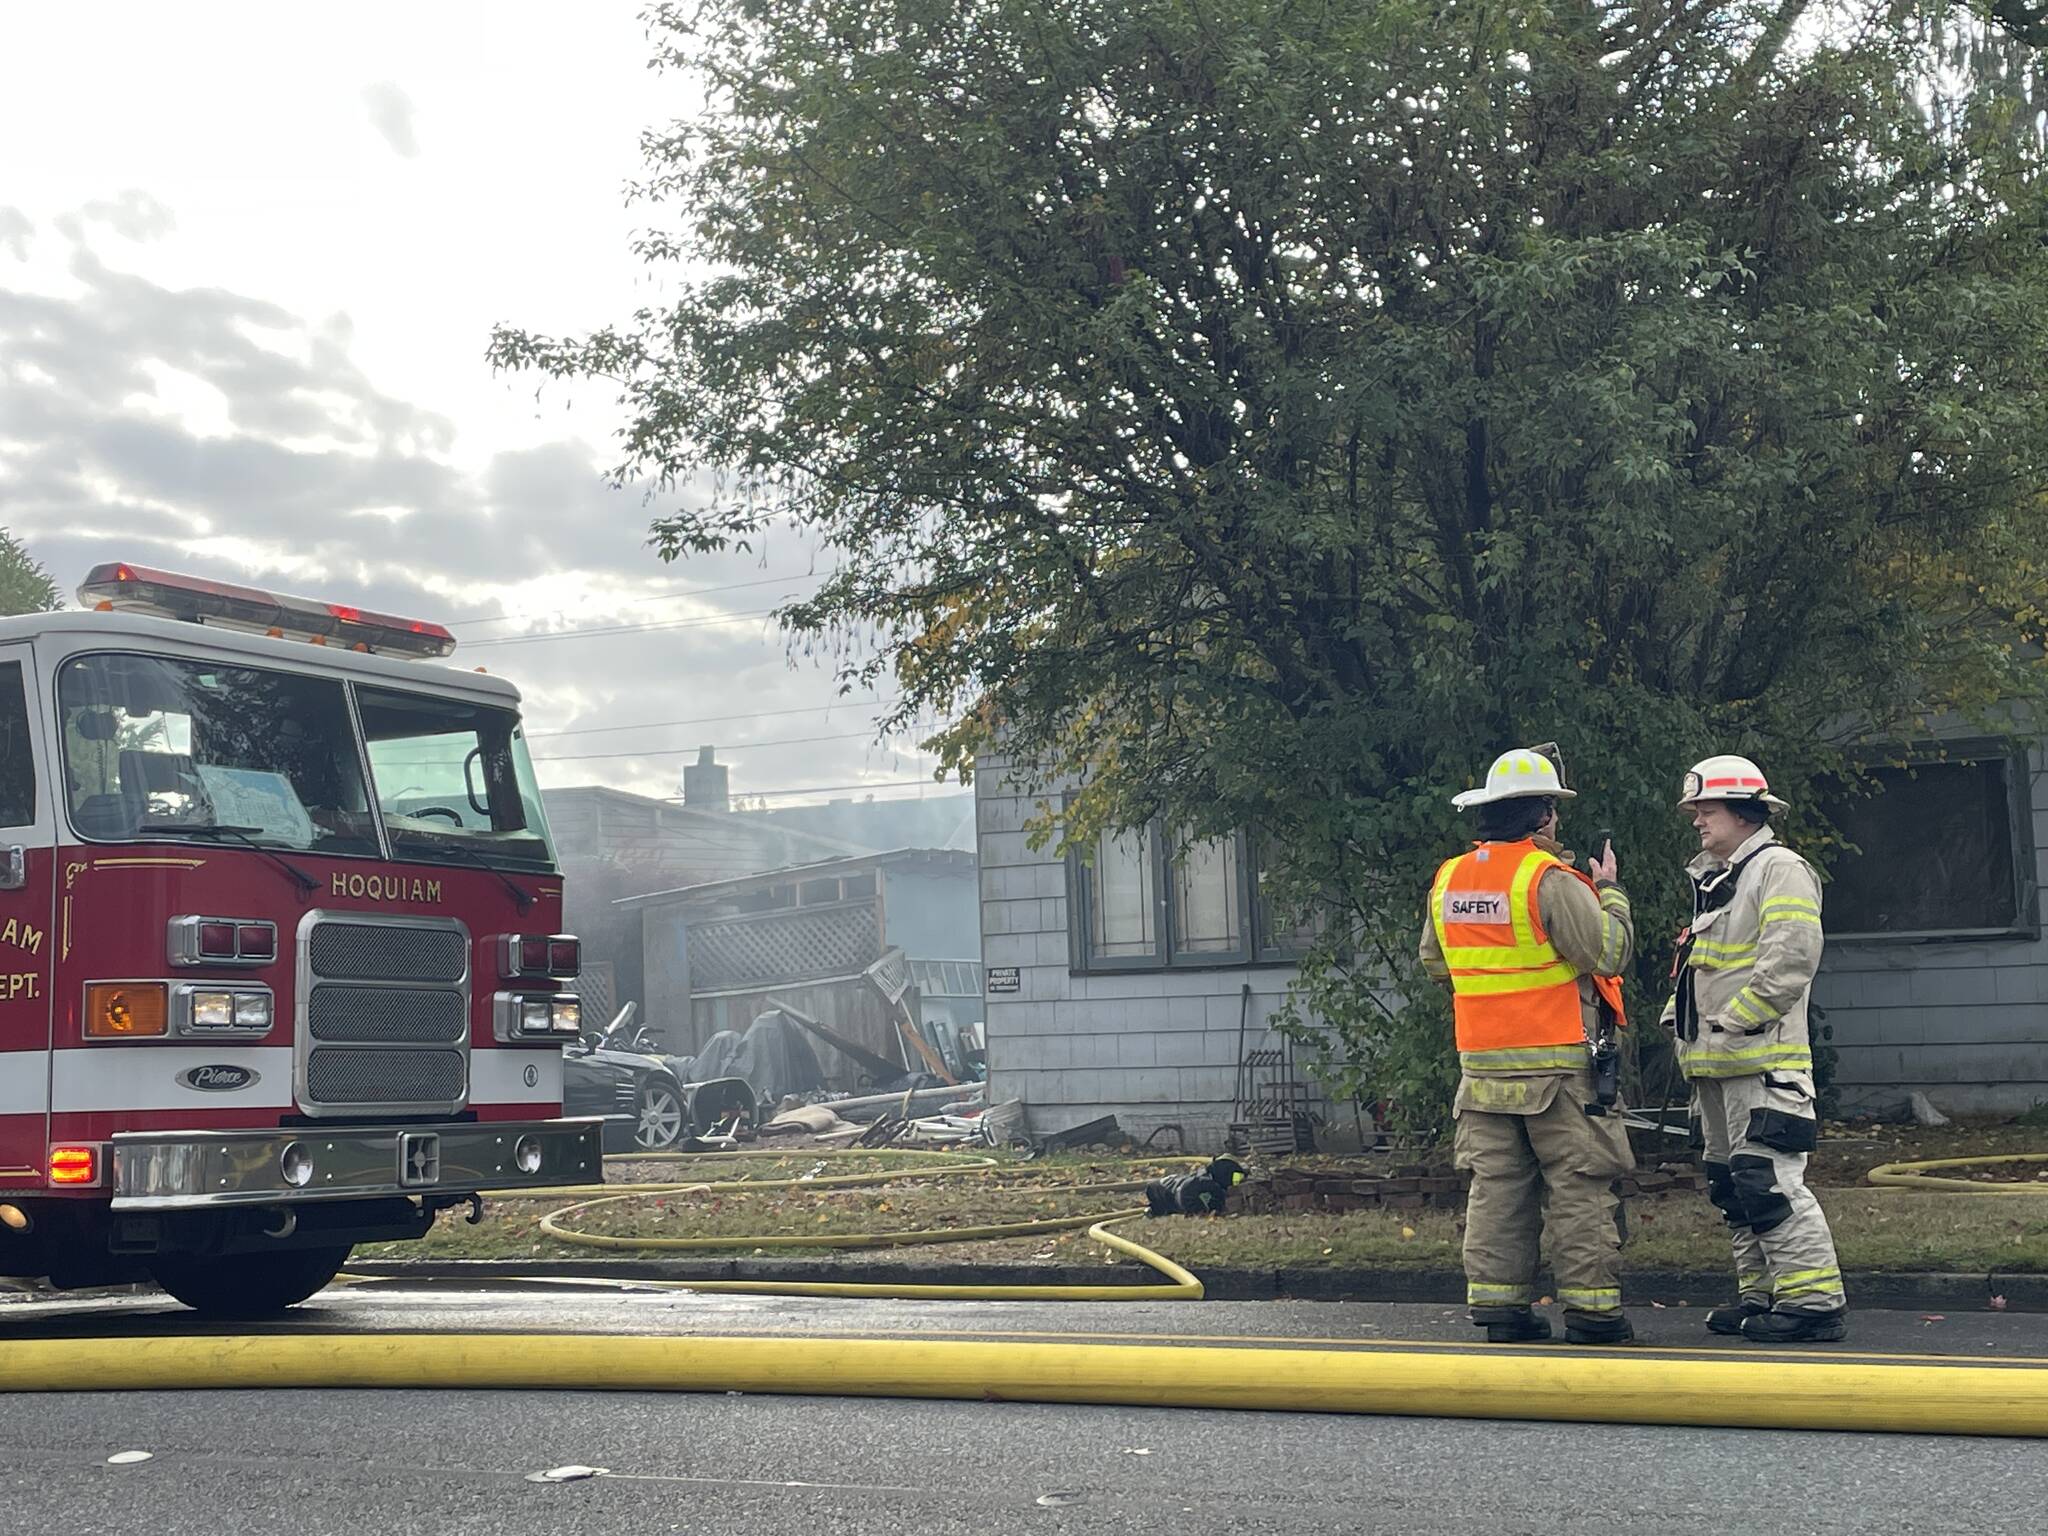 Firefighters confer during the tail end of a response to a fire in Hoquiam on Thursday, Oct. 27. (Michael S. Lockett / The Daily World)